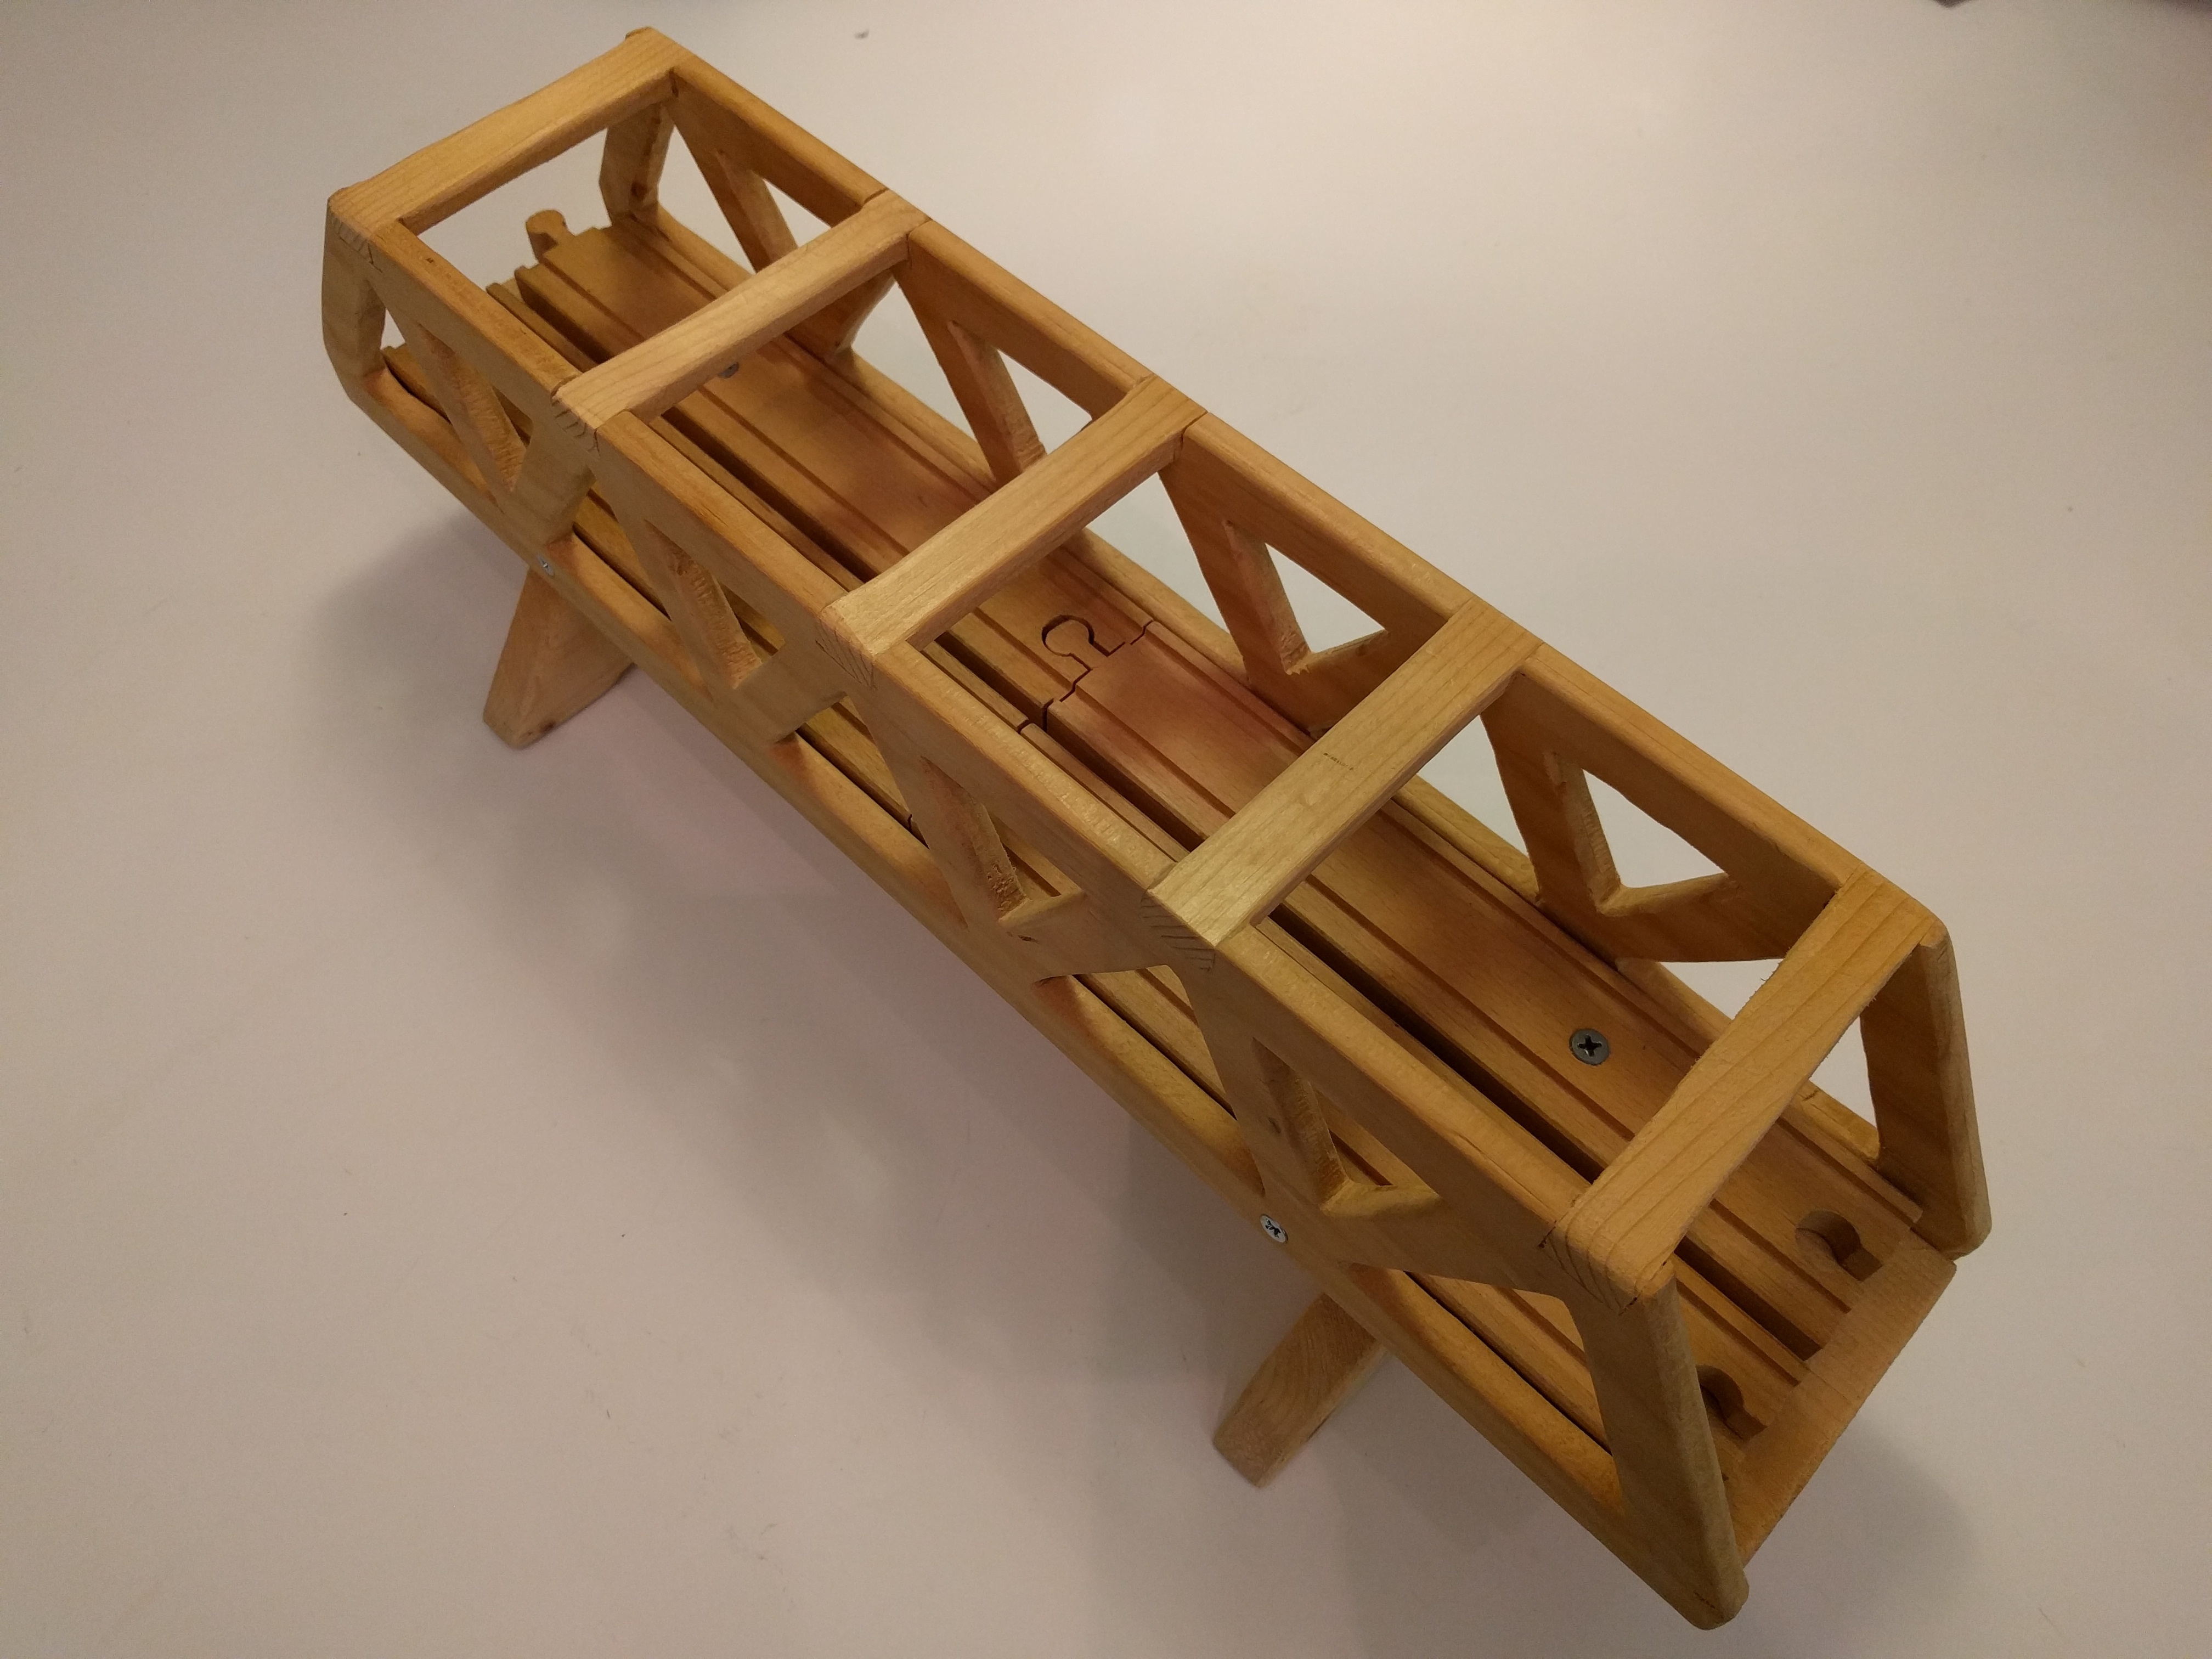 DIY Wooden Truss Bridge for Brio-compatible toy train sets - RYOBI Nation Projects4032 x 3024